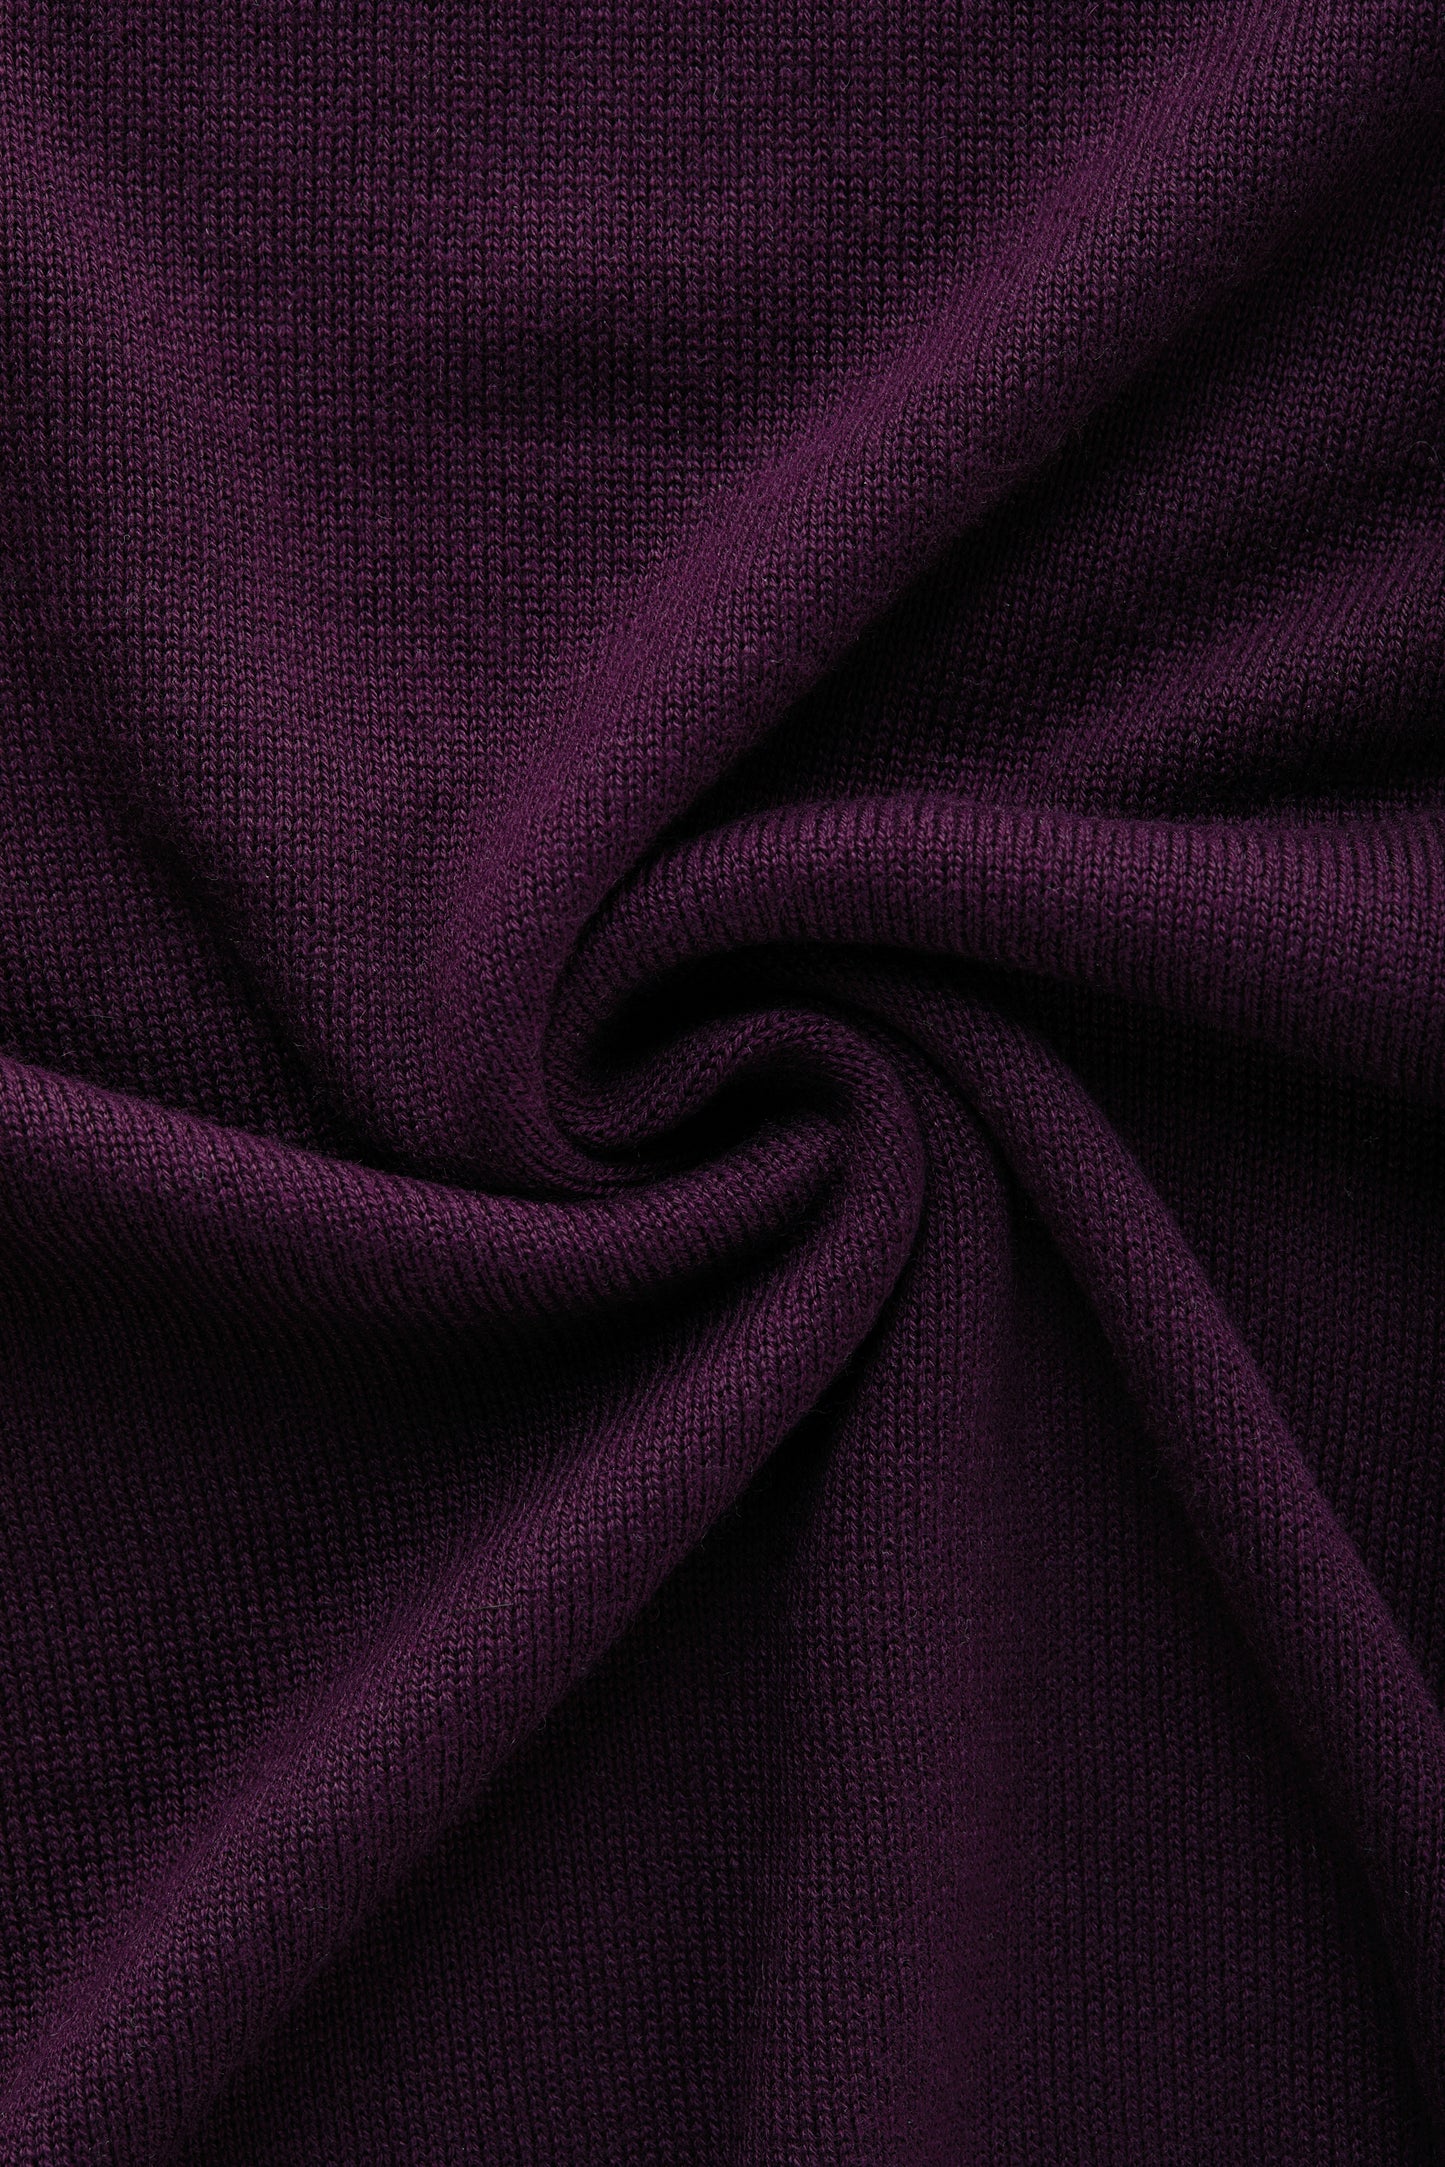 Long Sleeve Bamboo Cotton Cashmere Blend Knitted Polo Purple